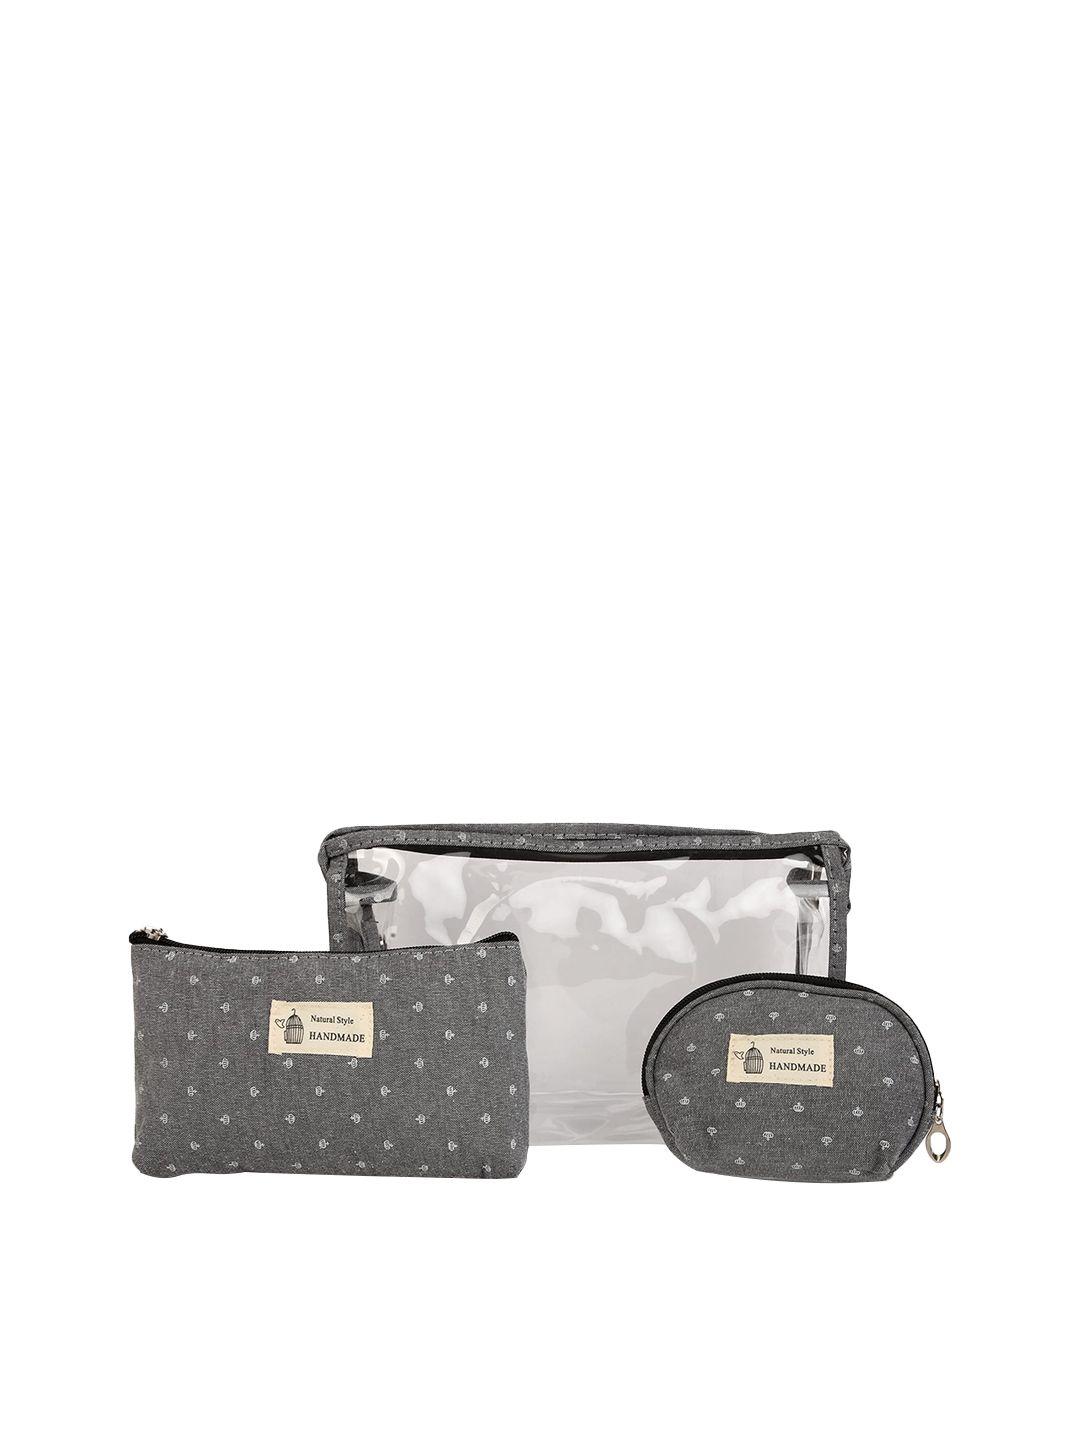 awestuffs set of 3 grey printed makeup & toiletry pouch